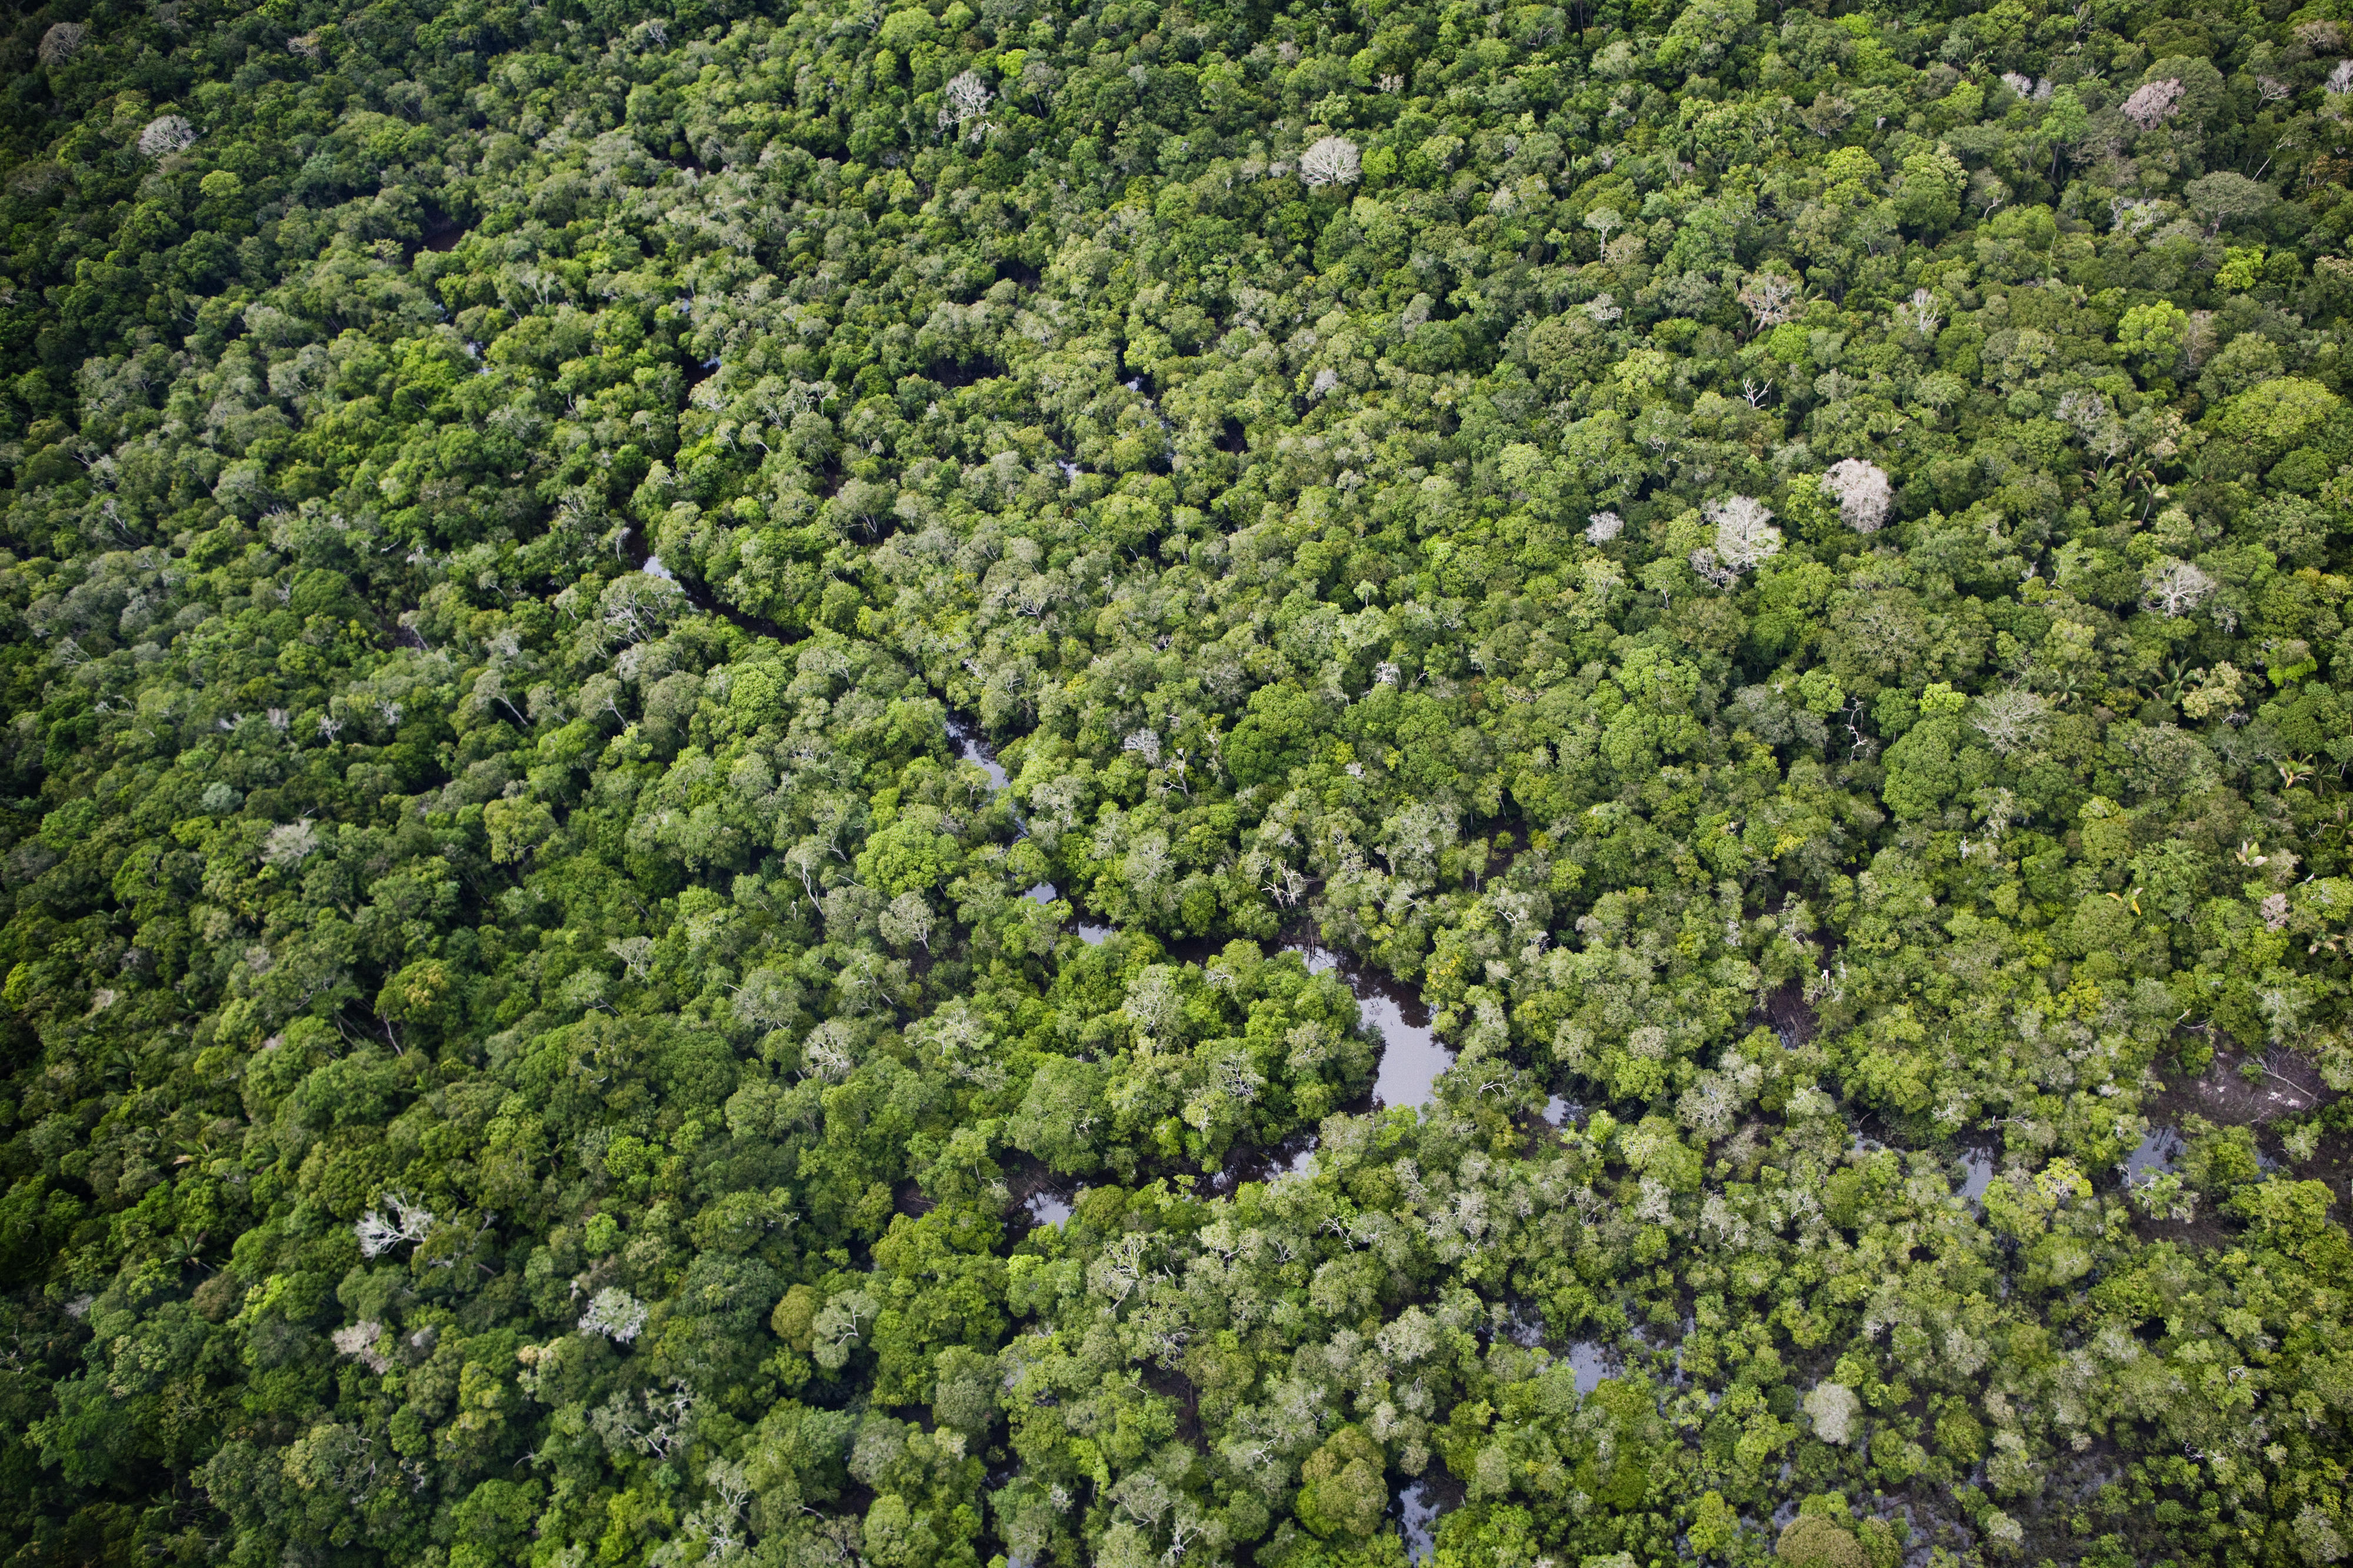 Aerial view of the rainforest in the Anavilhanas National Park in Manaus, Brazil